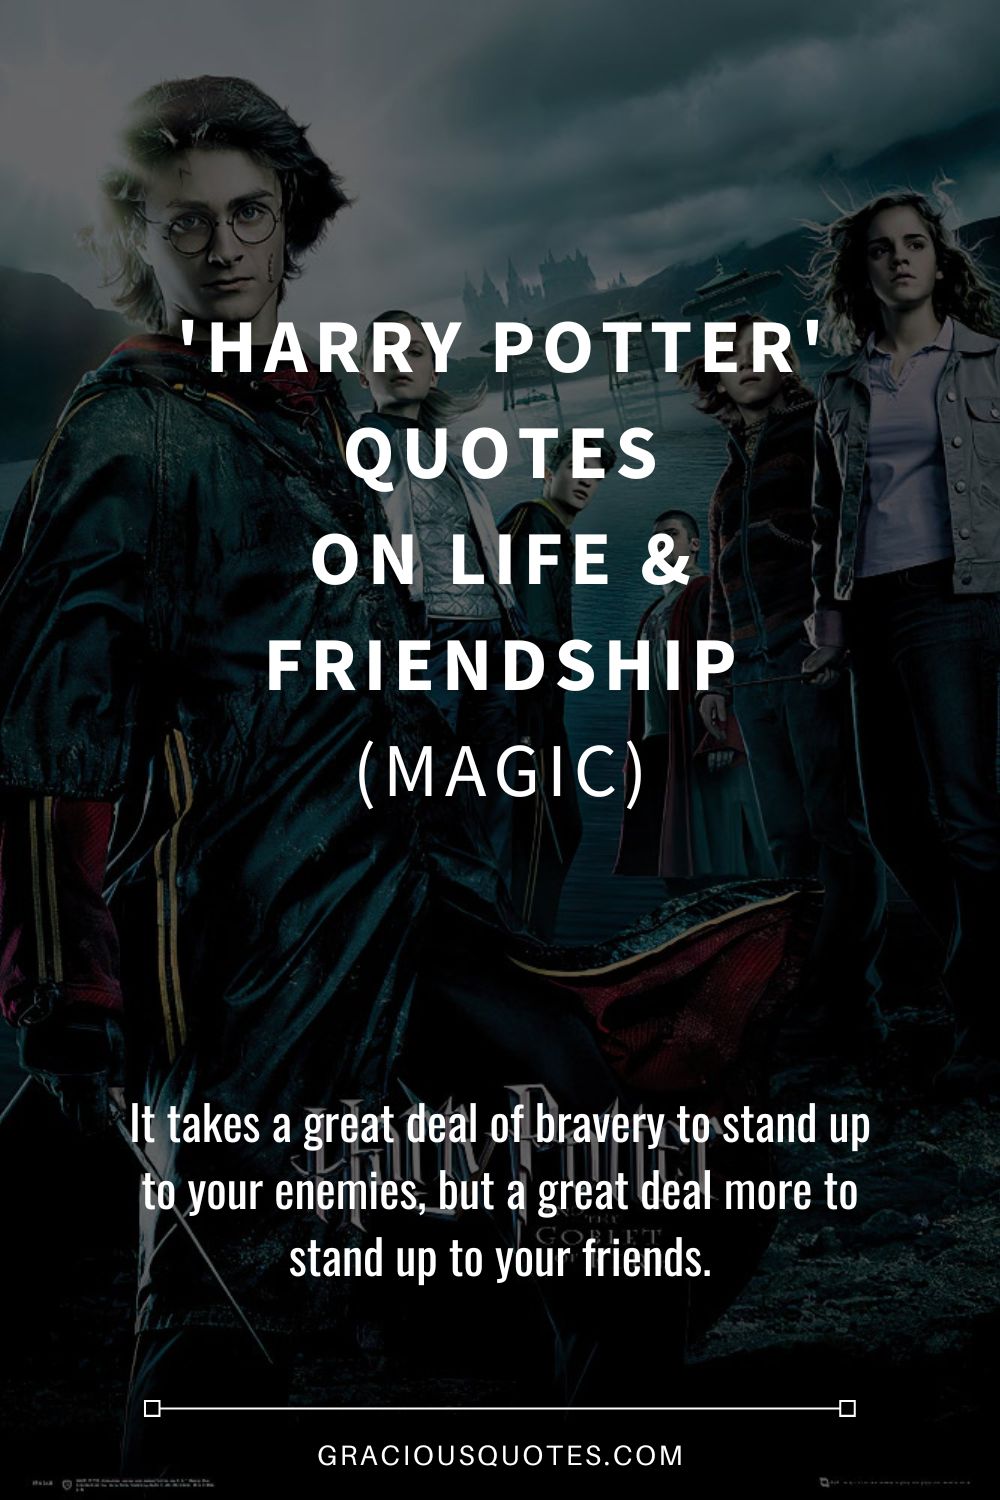 'Harry Potter' Quotes on Life & Friendship (MAGIC) - Gracious Quotes